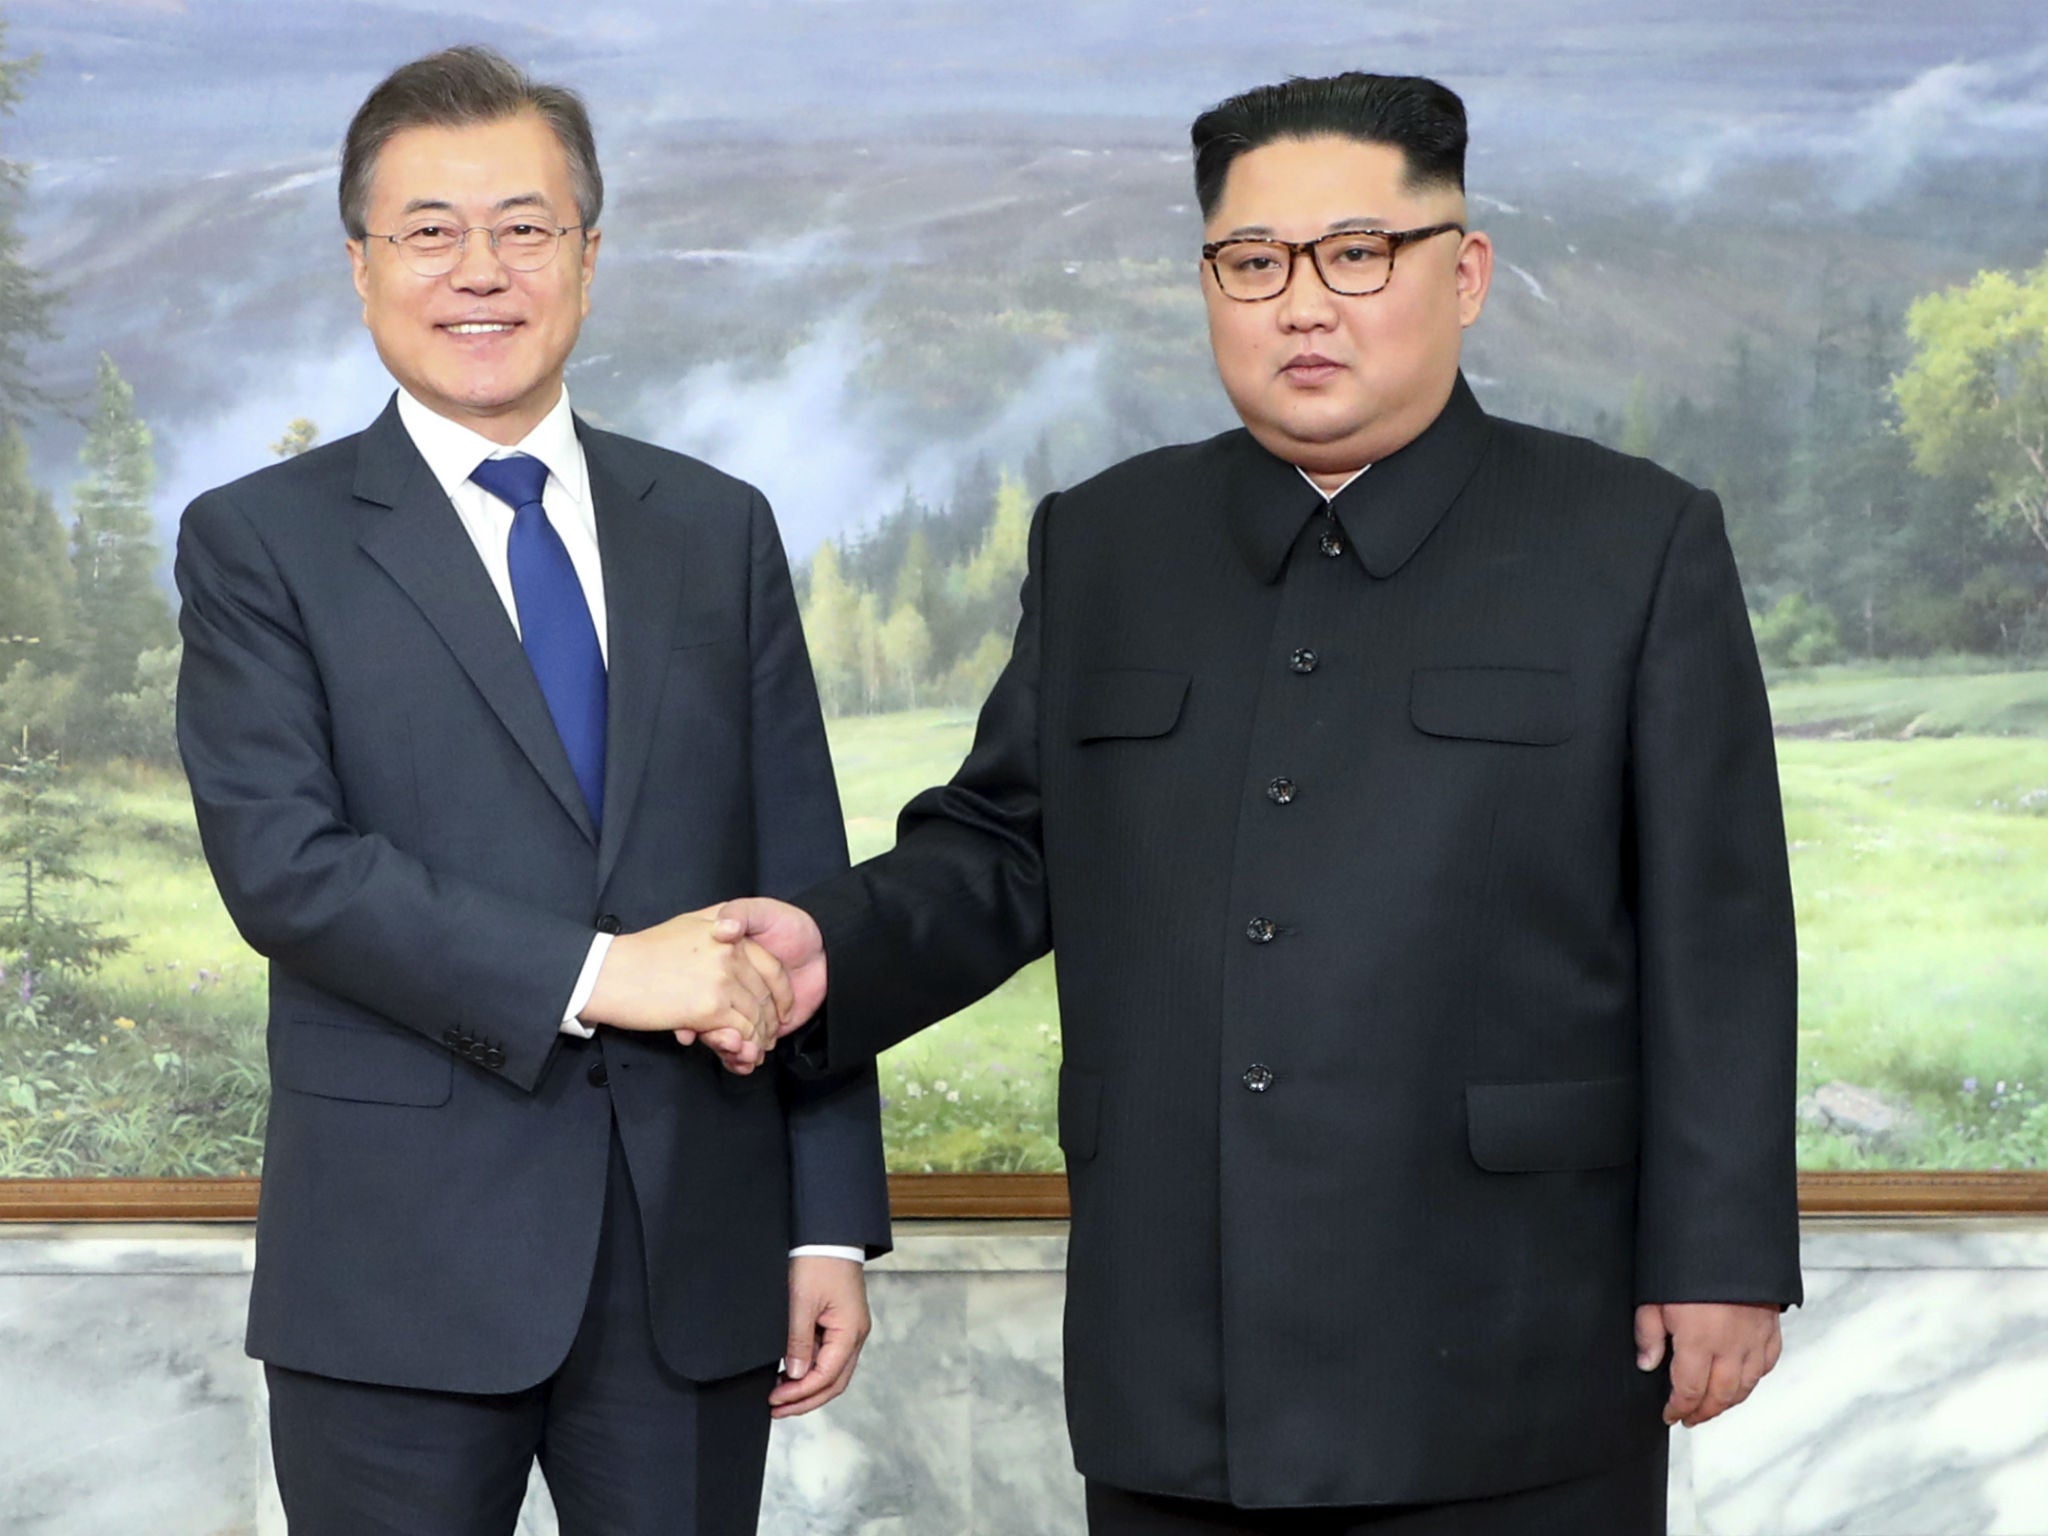 South Korea’s Moon Jae-in meets Kim Jong-un at the border city of Panmunjom in May – Kim has reaffirmed a commitment to denuclearisation and working with Washington